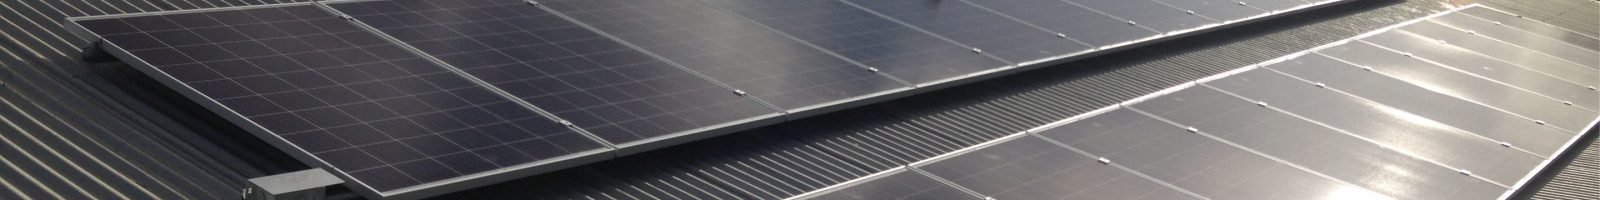 Commercial Solar PV Systems